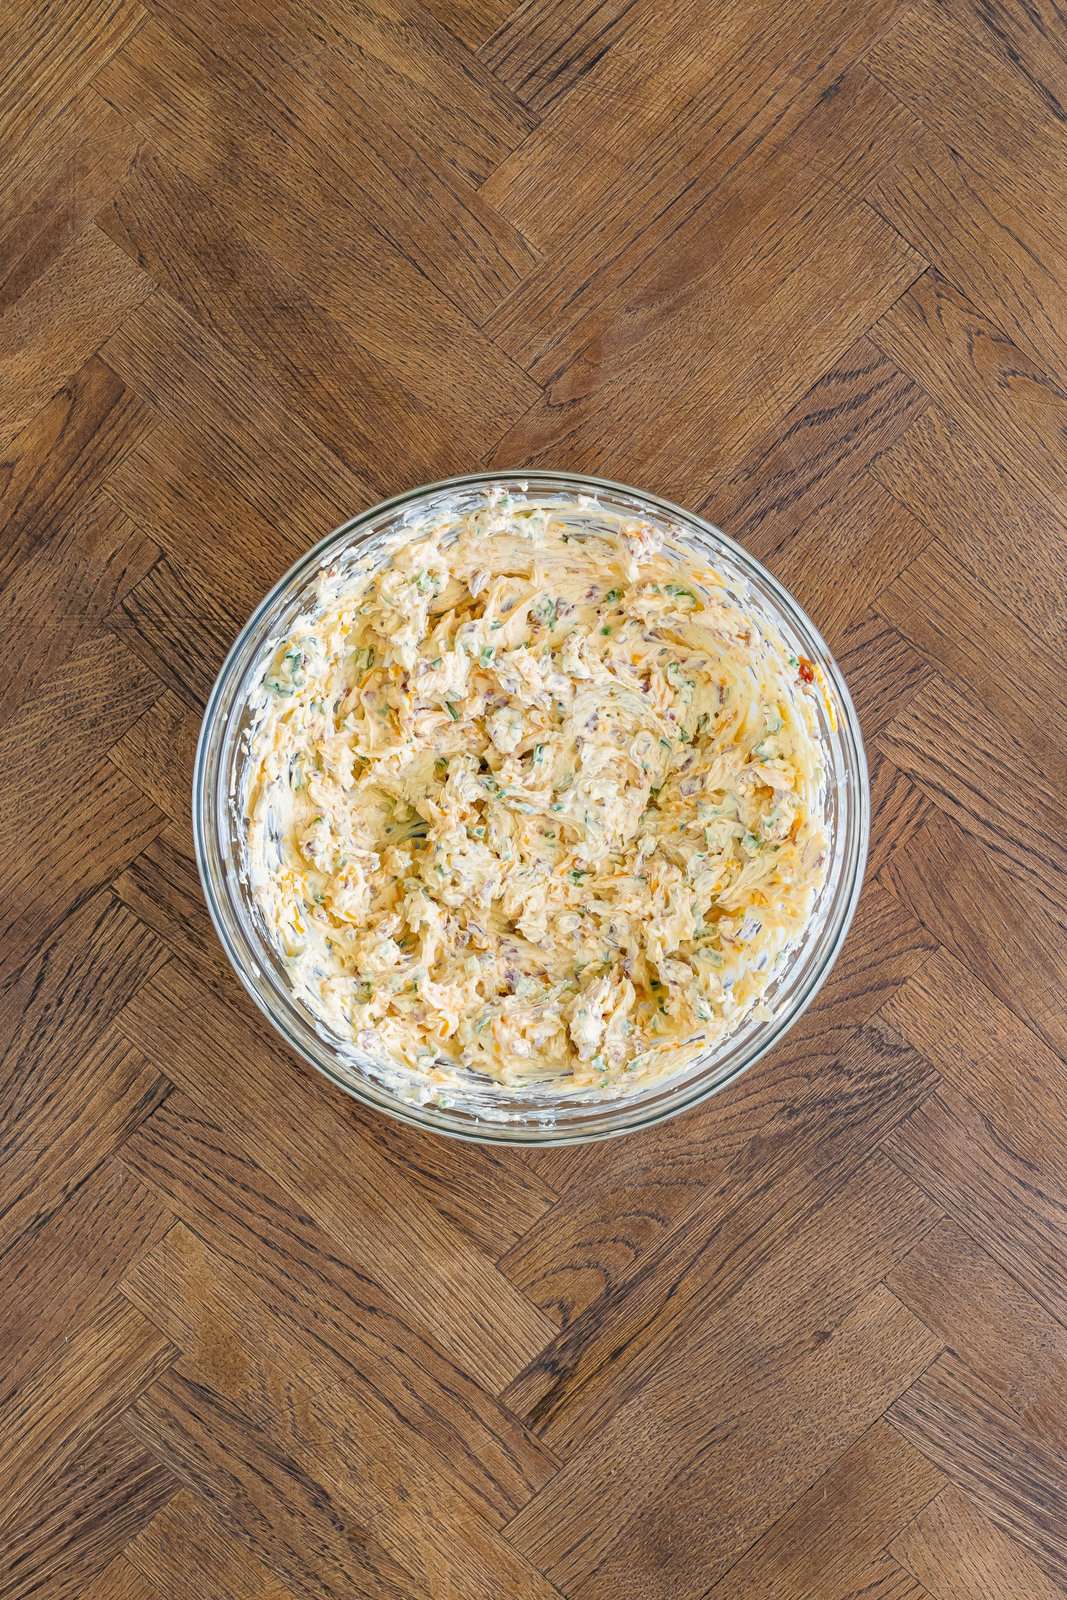 A glass mixing bowl of cream cheese, ranch seasonings, and other spices.